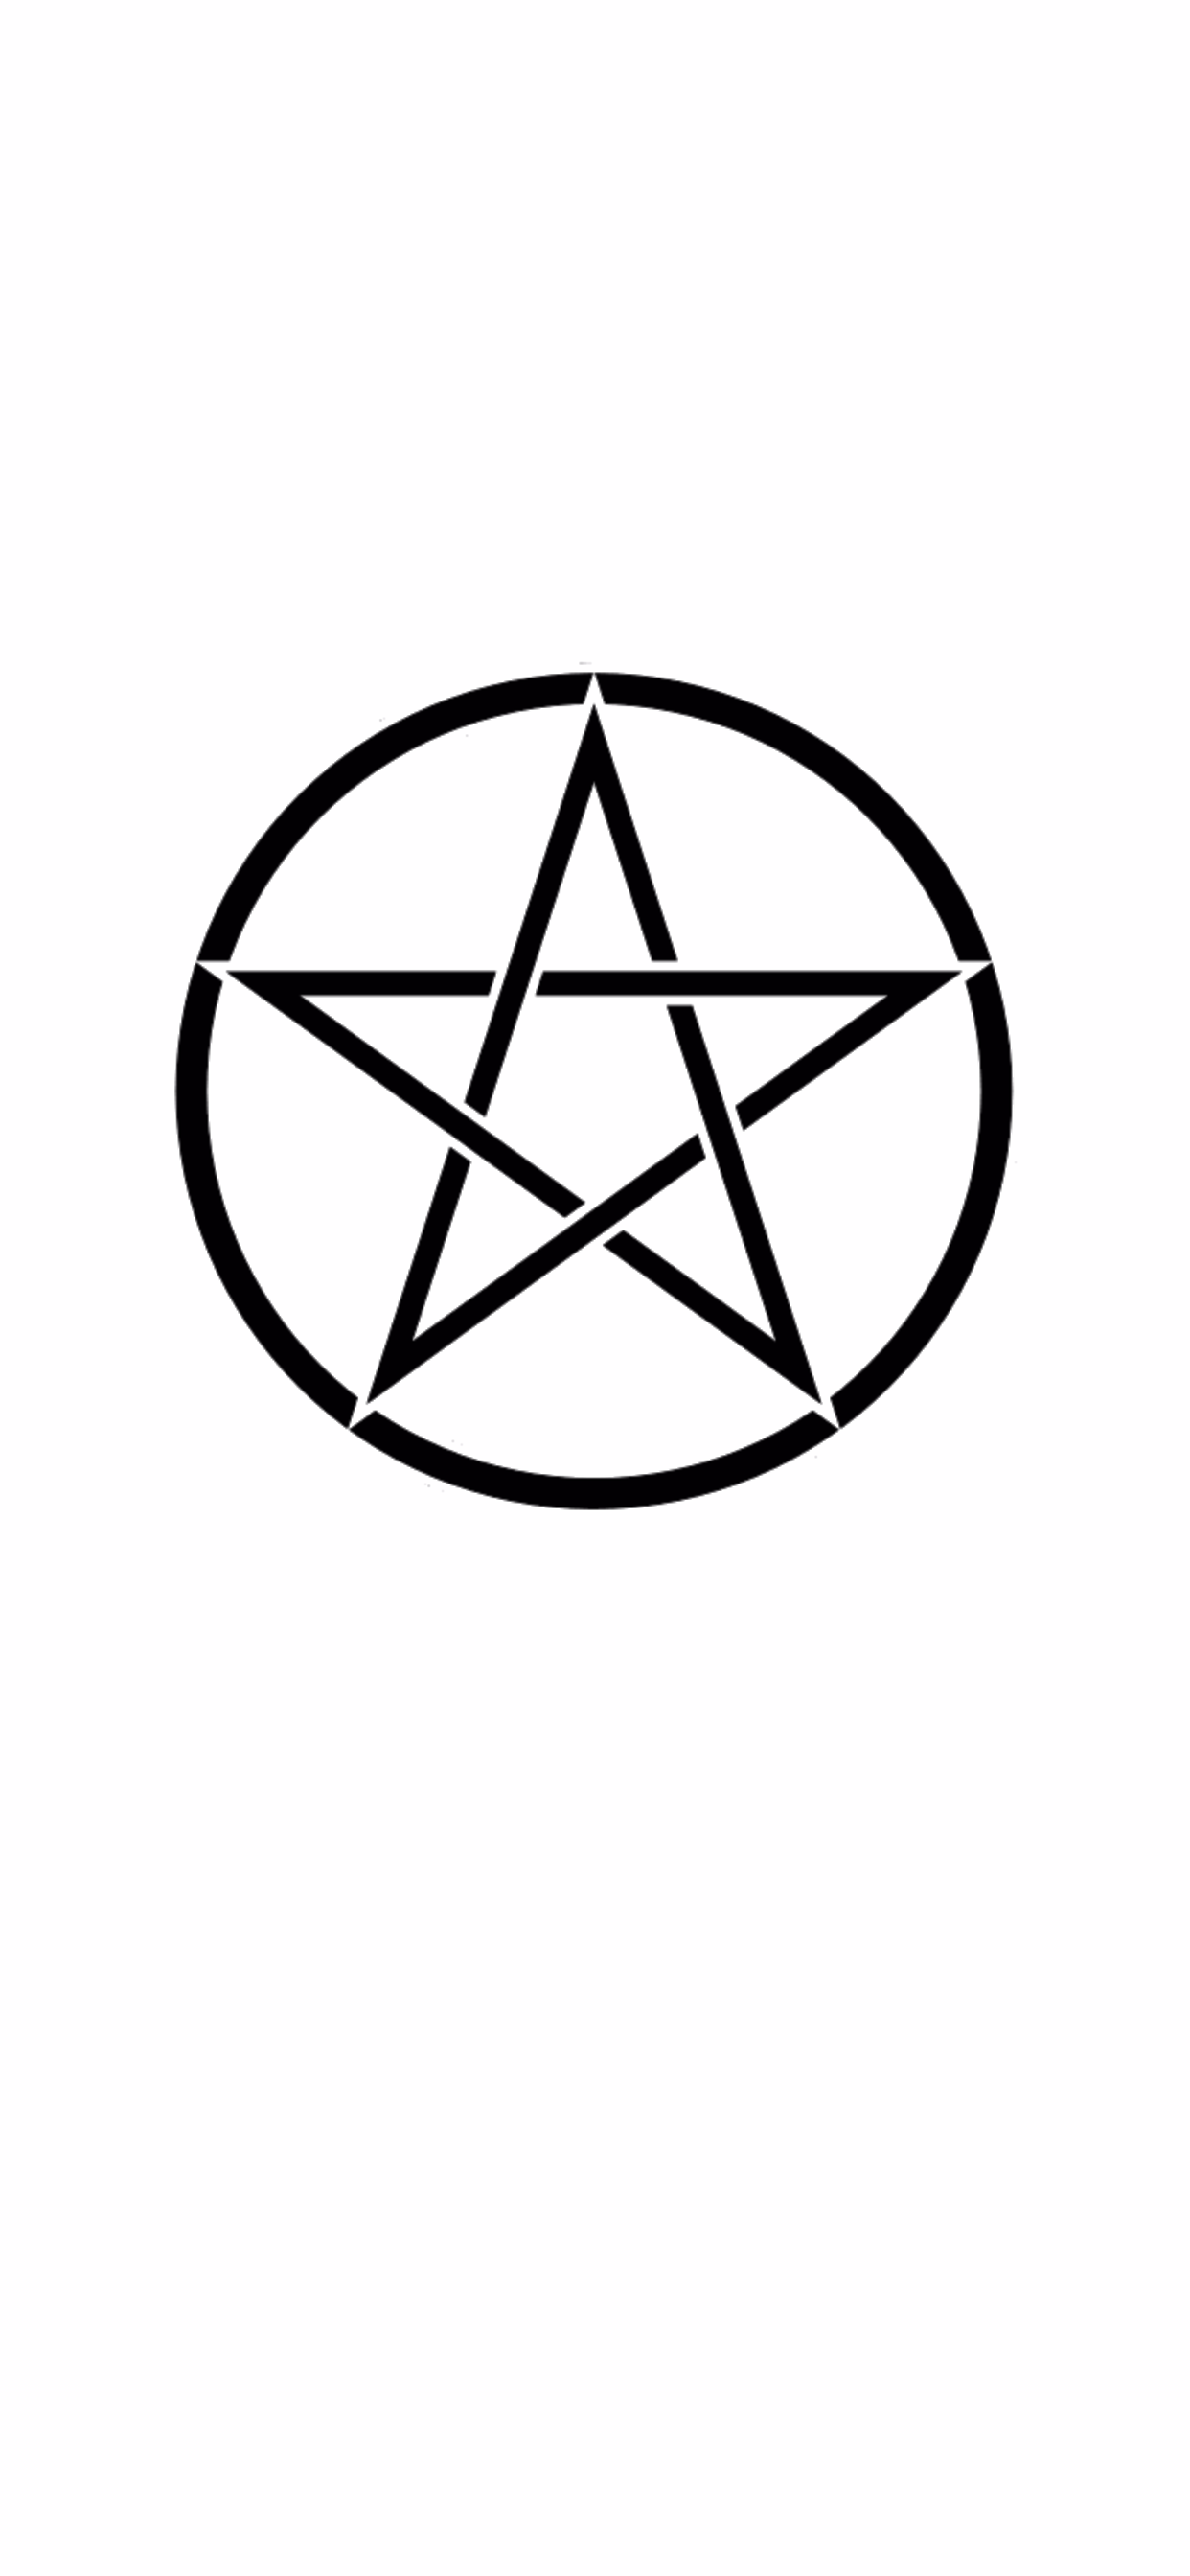 General 1242x2688 Pentacle Wicca Witchcraft symbols phone